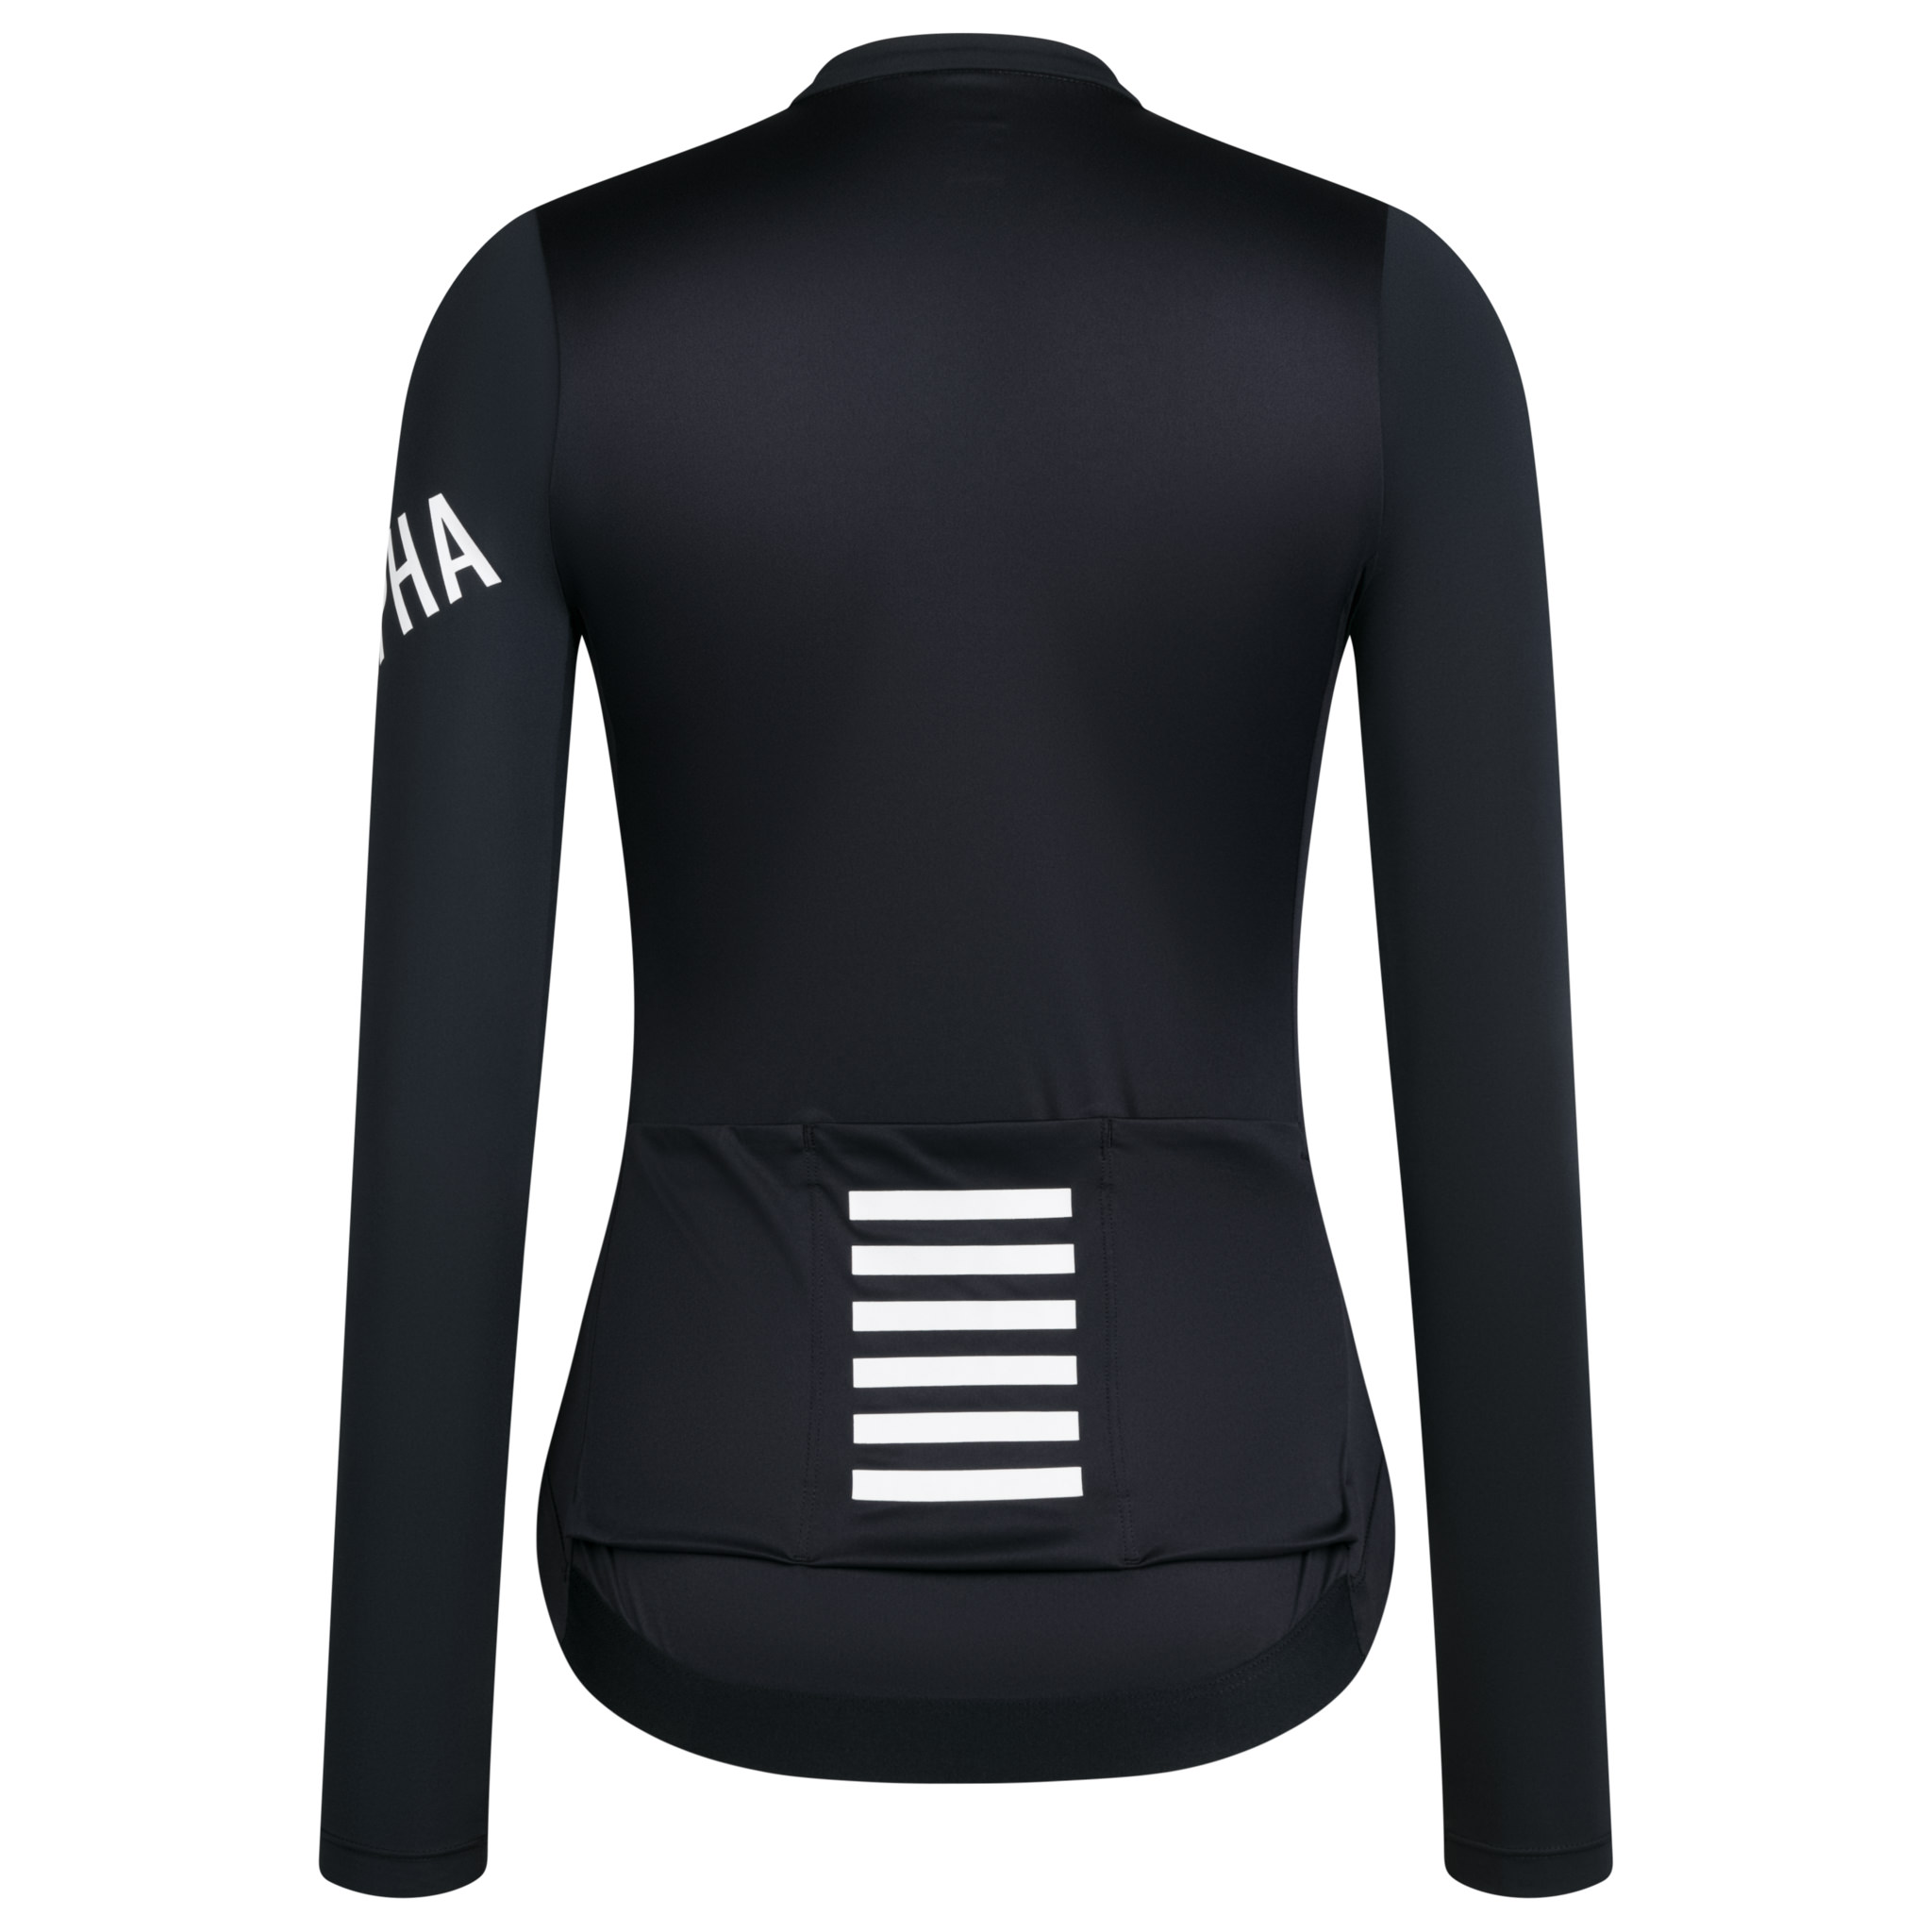 Rapha Pro Team Training Tights and Long Sleeve jersey review: The